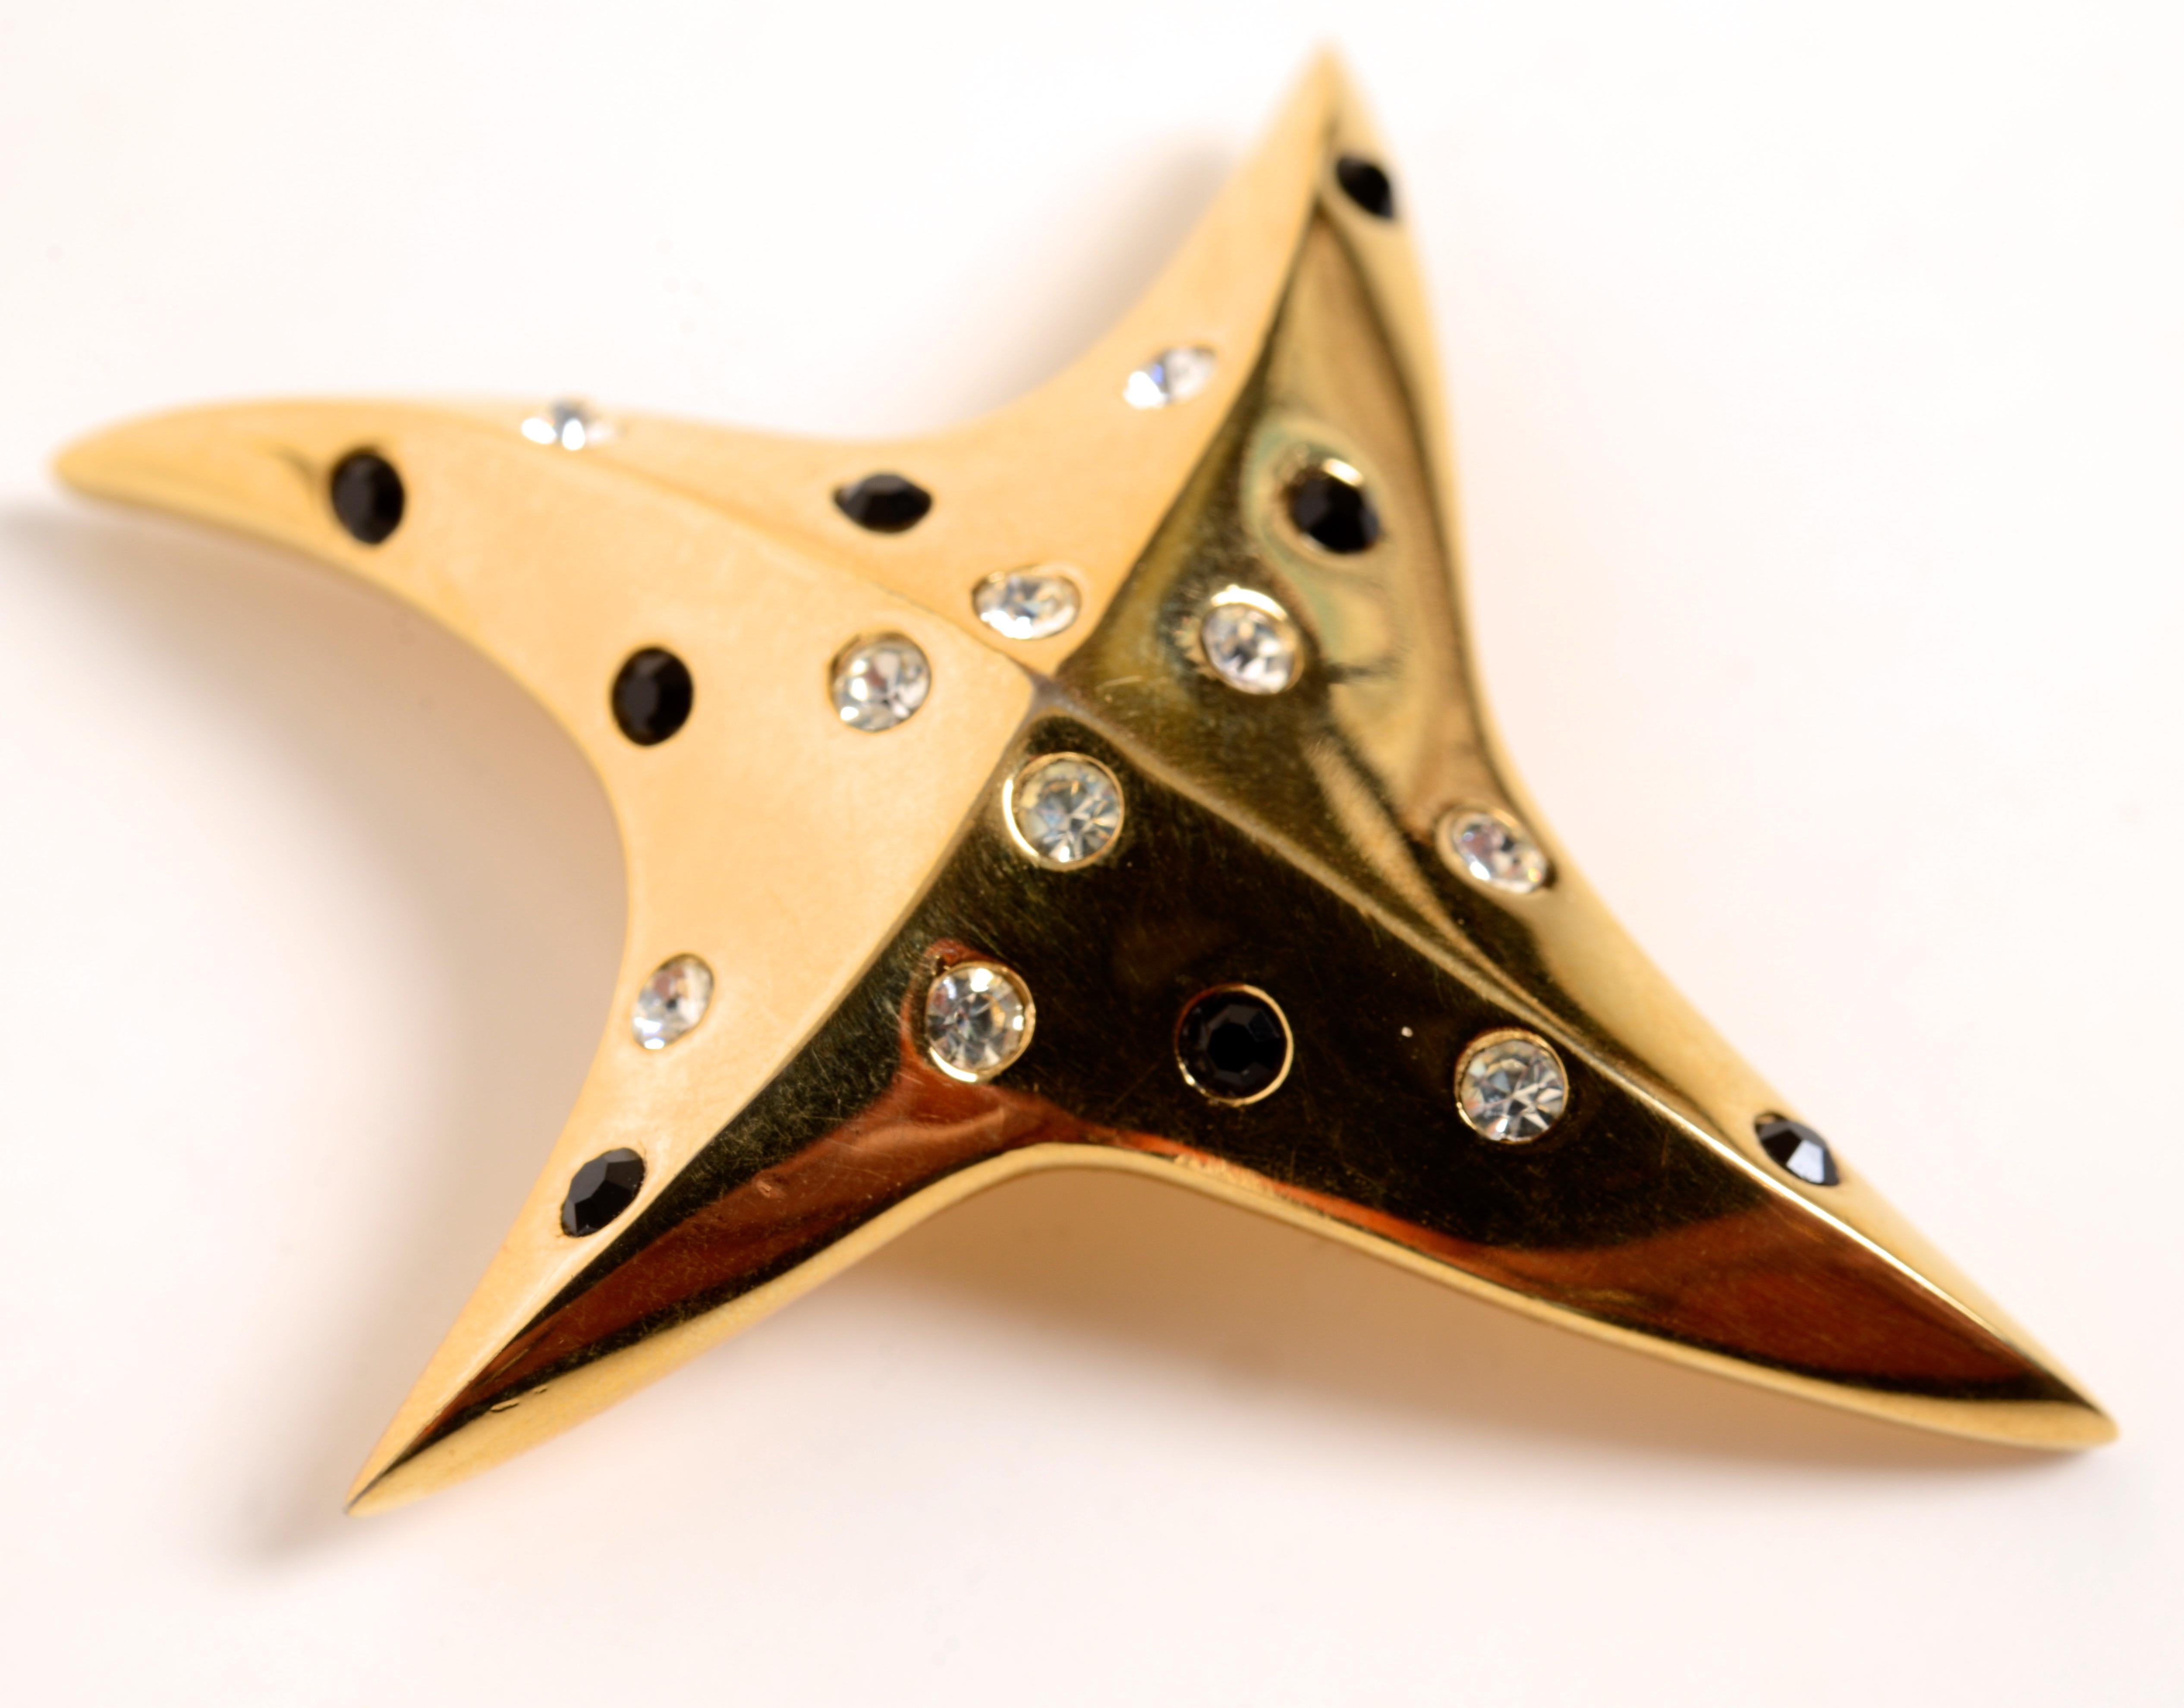 Vintage Givenchy Star Brooch c1980. The brooch is gold plated with clear rhinestones and faux sapphires and is stamped 'Givenchy Paris New York 1980' on the reverse. With locking pin back. This is unusual with faux rhinestones and sapphires, most